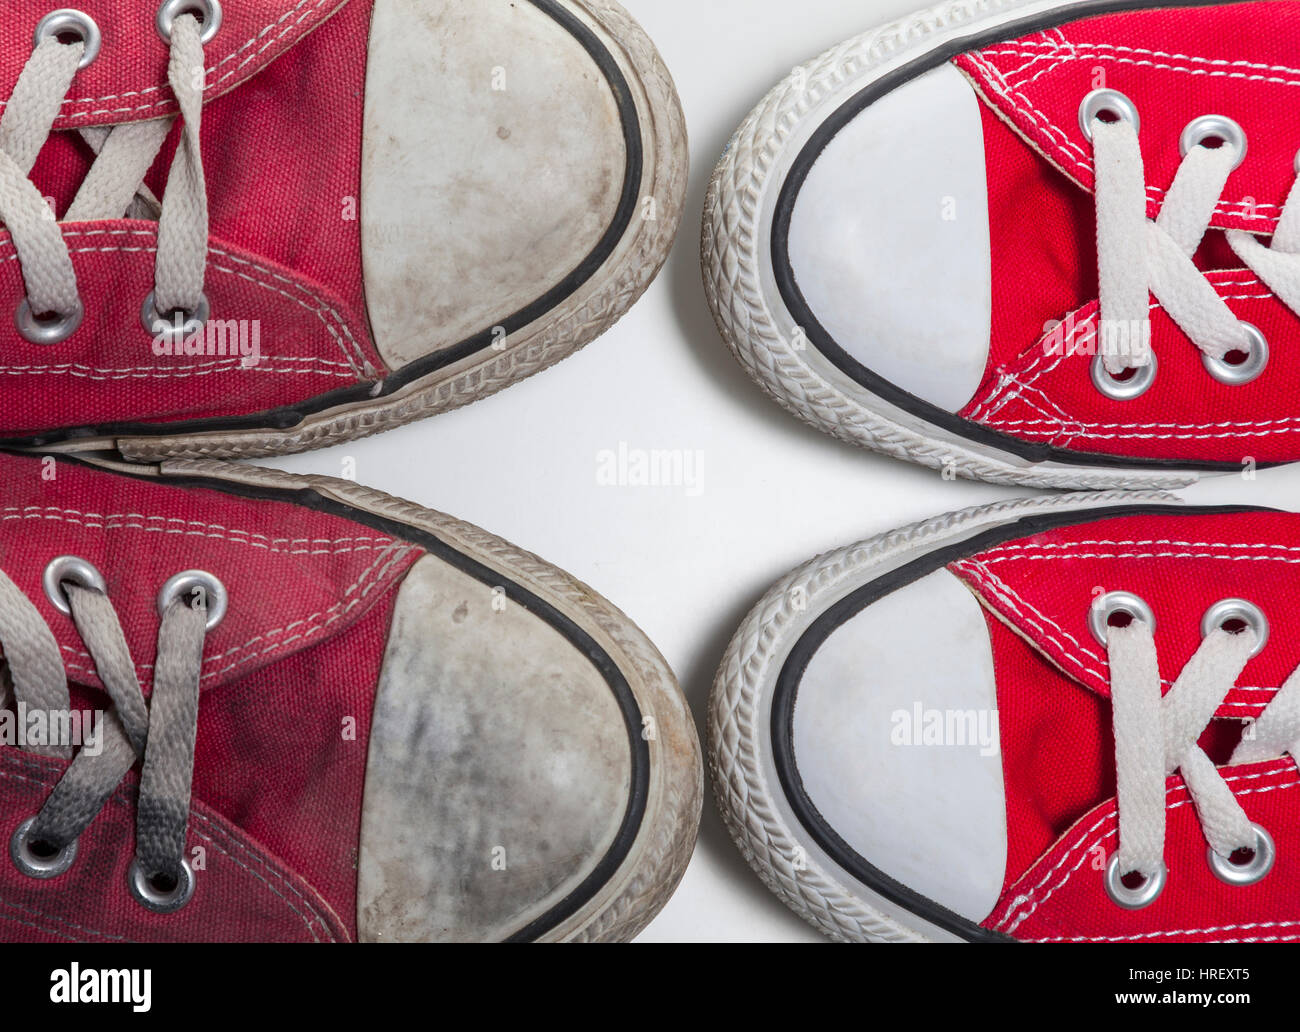 two pairs of old and new red basketball sneakers isolated on white background Stock Photo